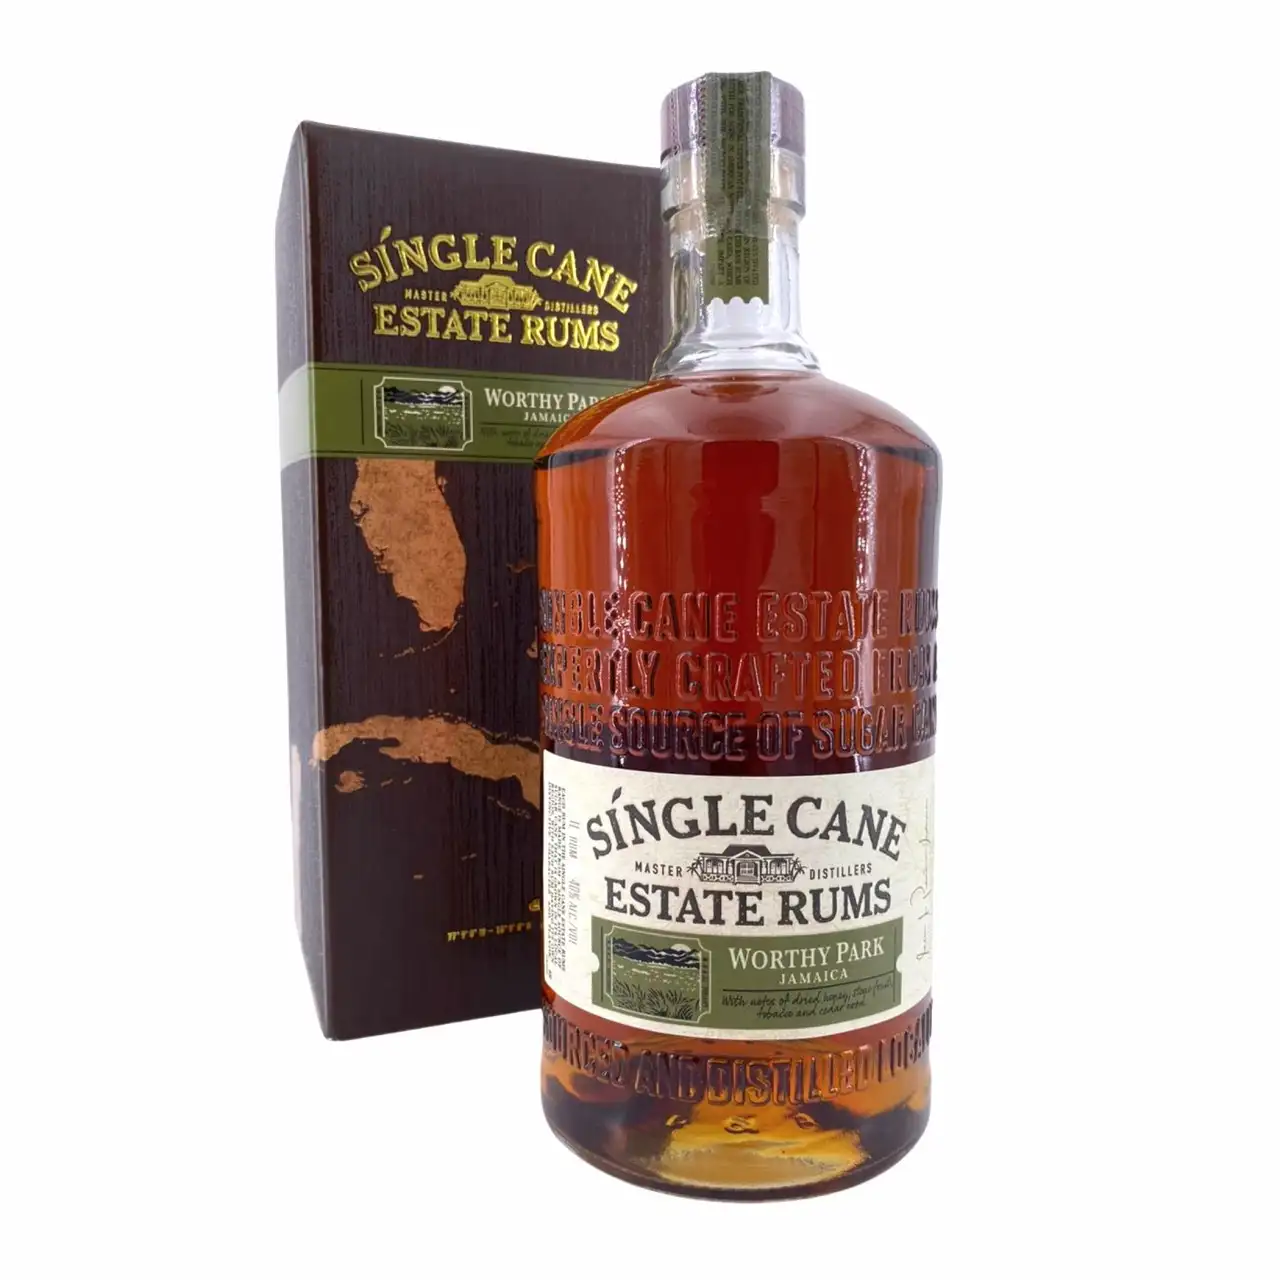 Image of the front of the bottle of the rum Single Cane Estate Rums